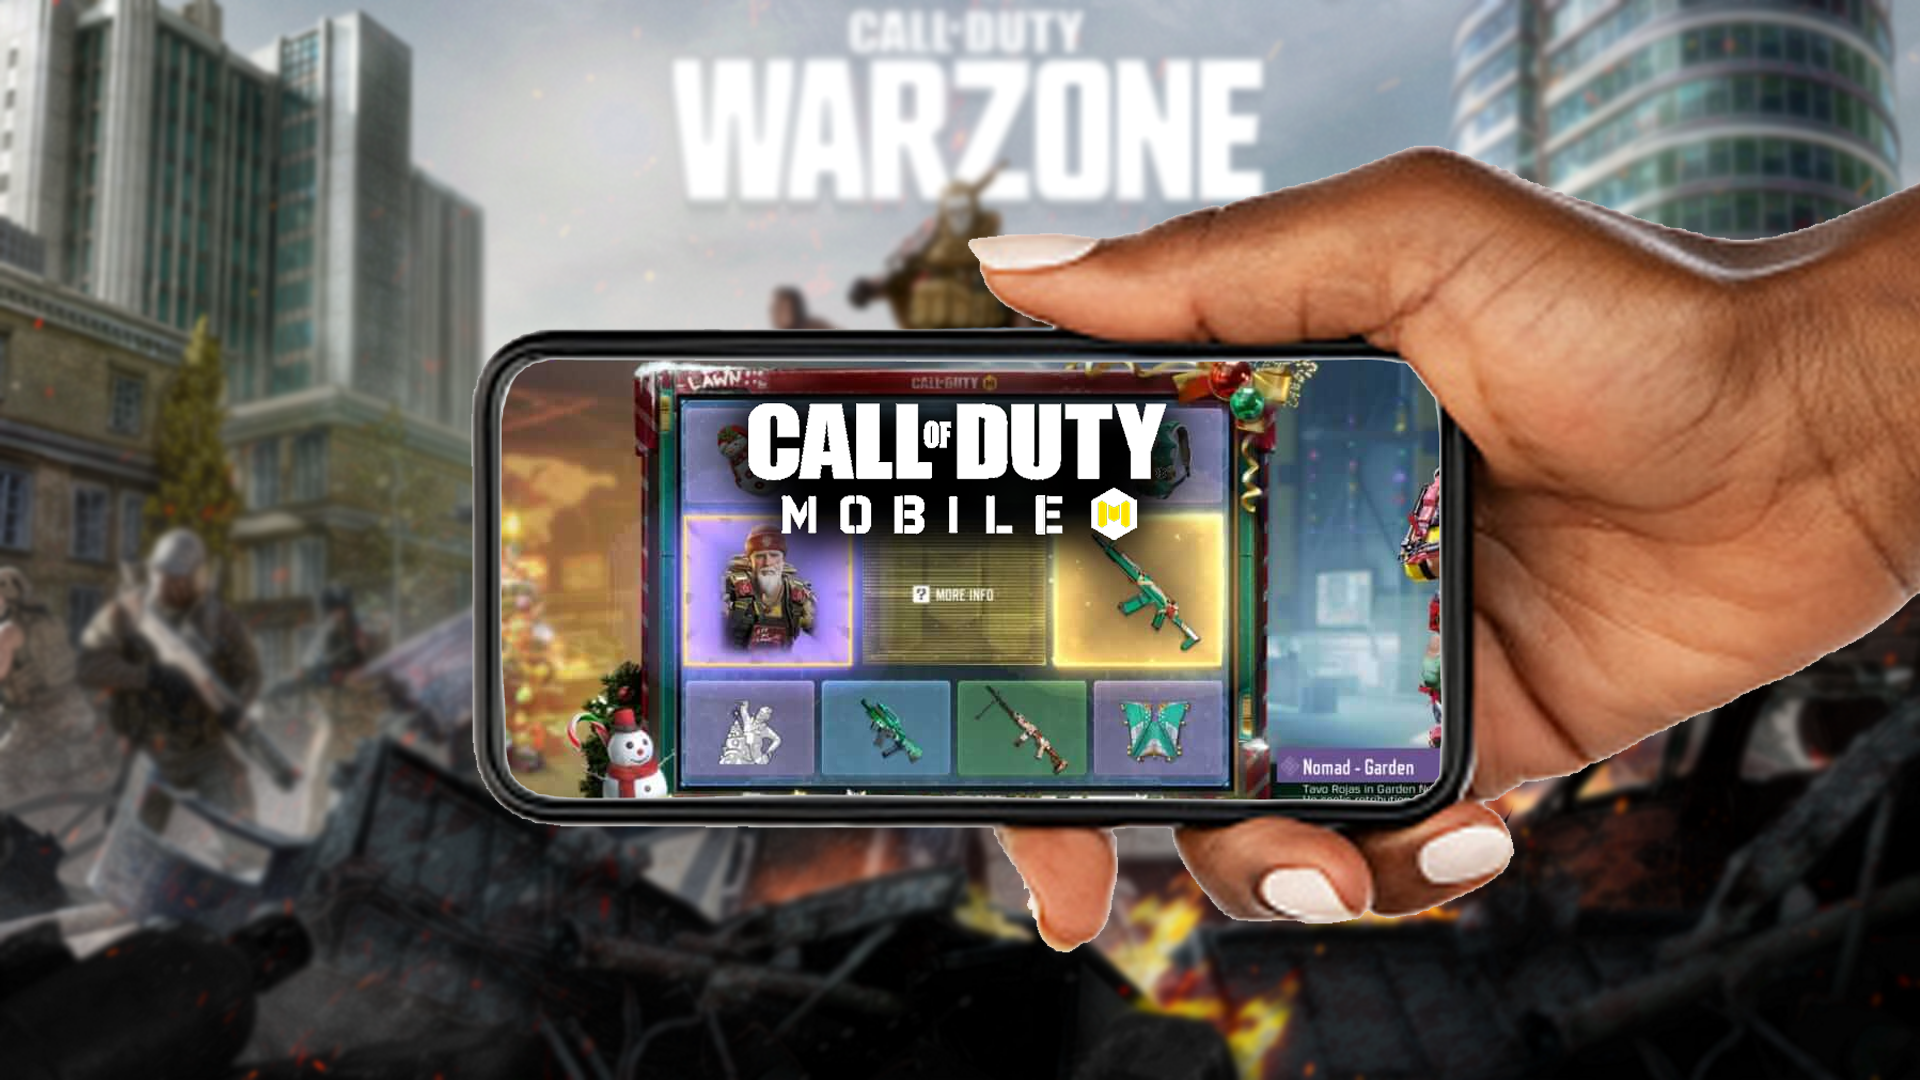 Call of Duty:Warzone Mobile  Pinoy Internet and Technology Forums